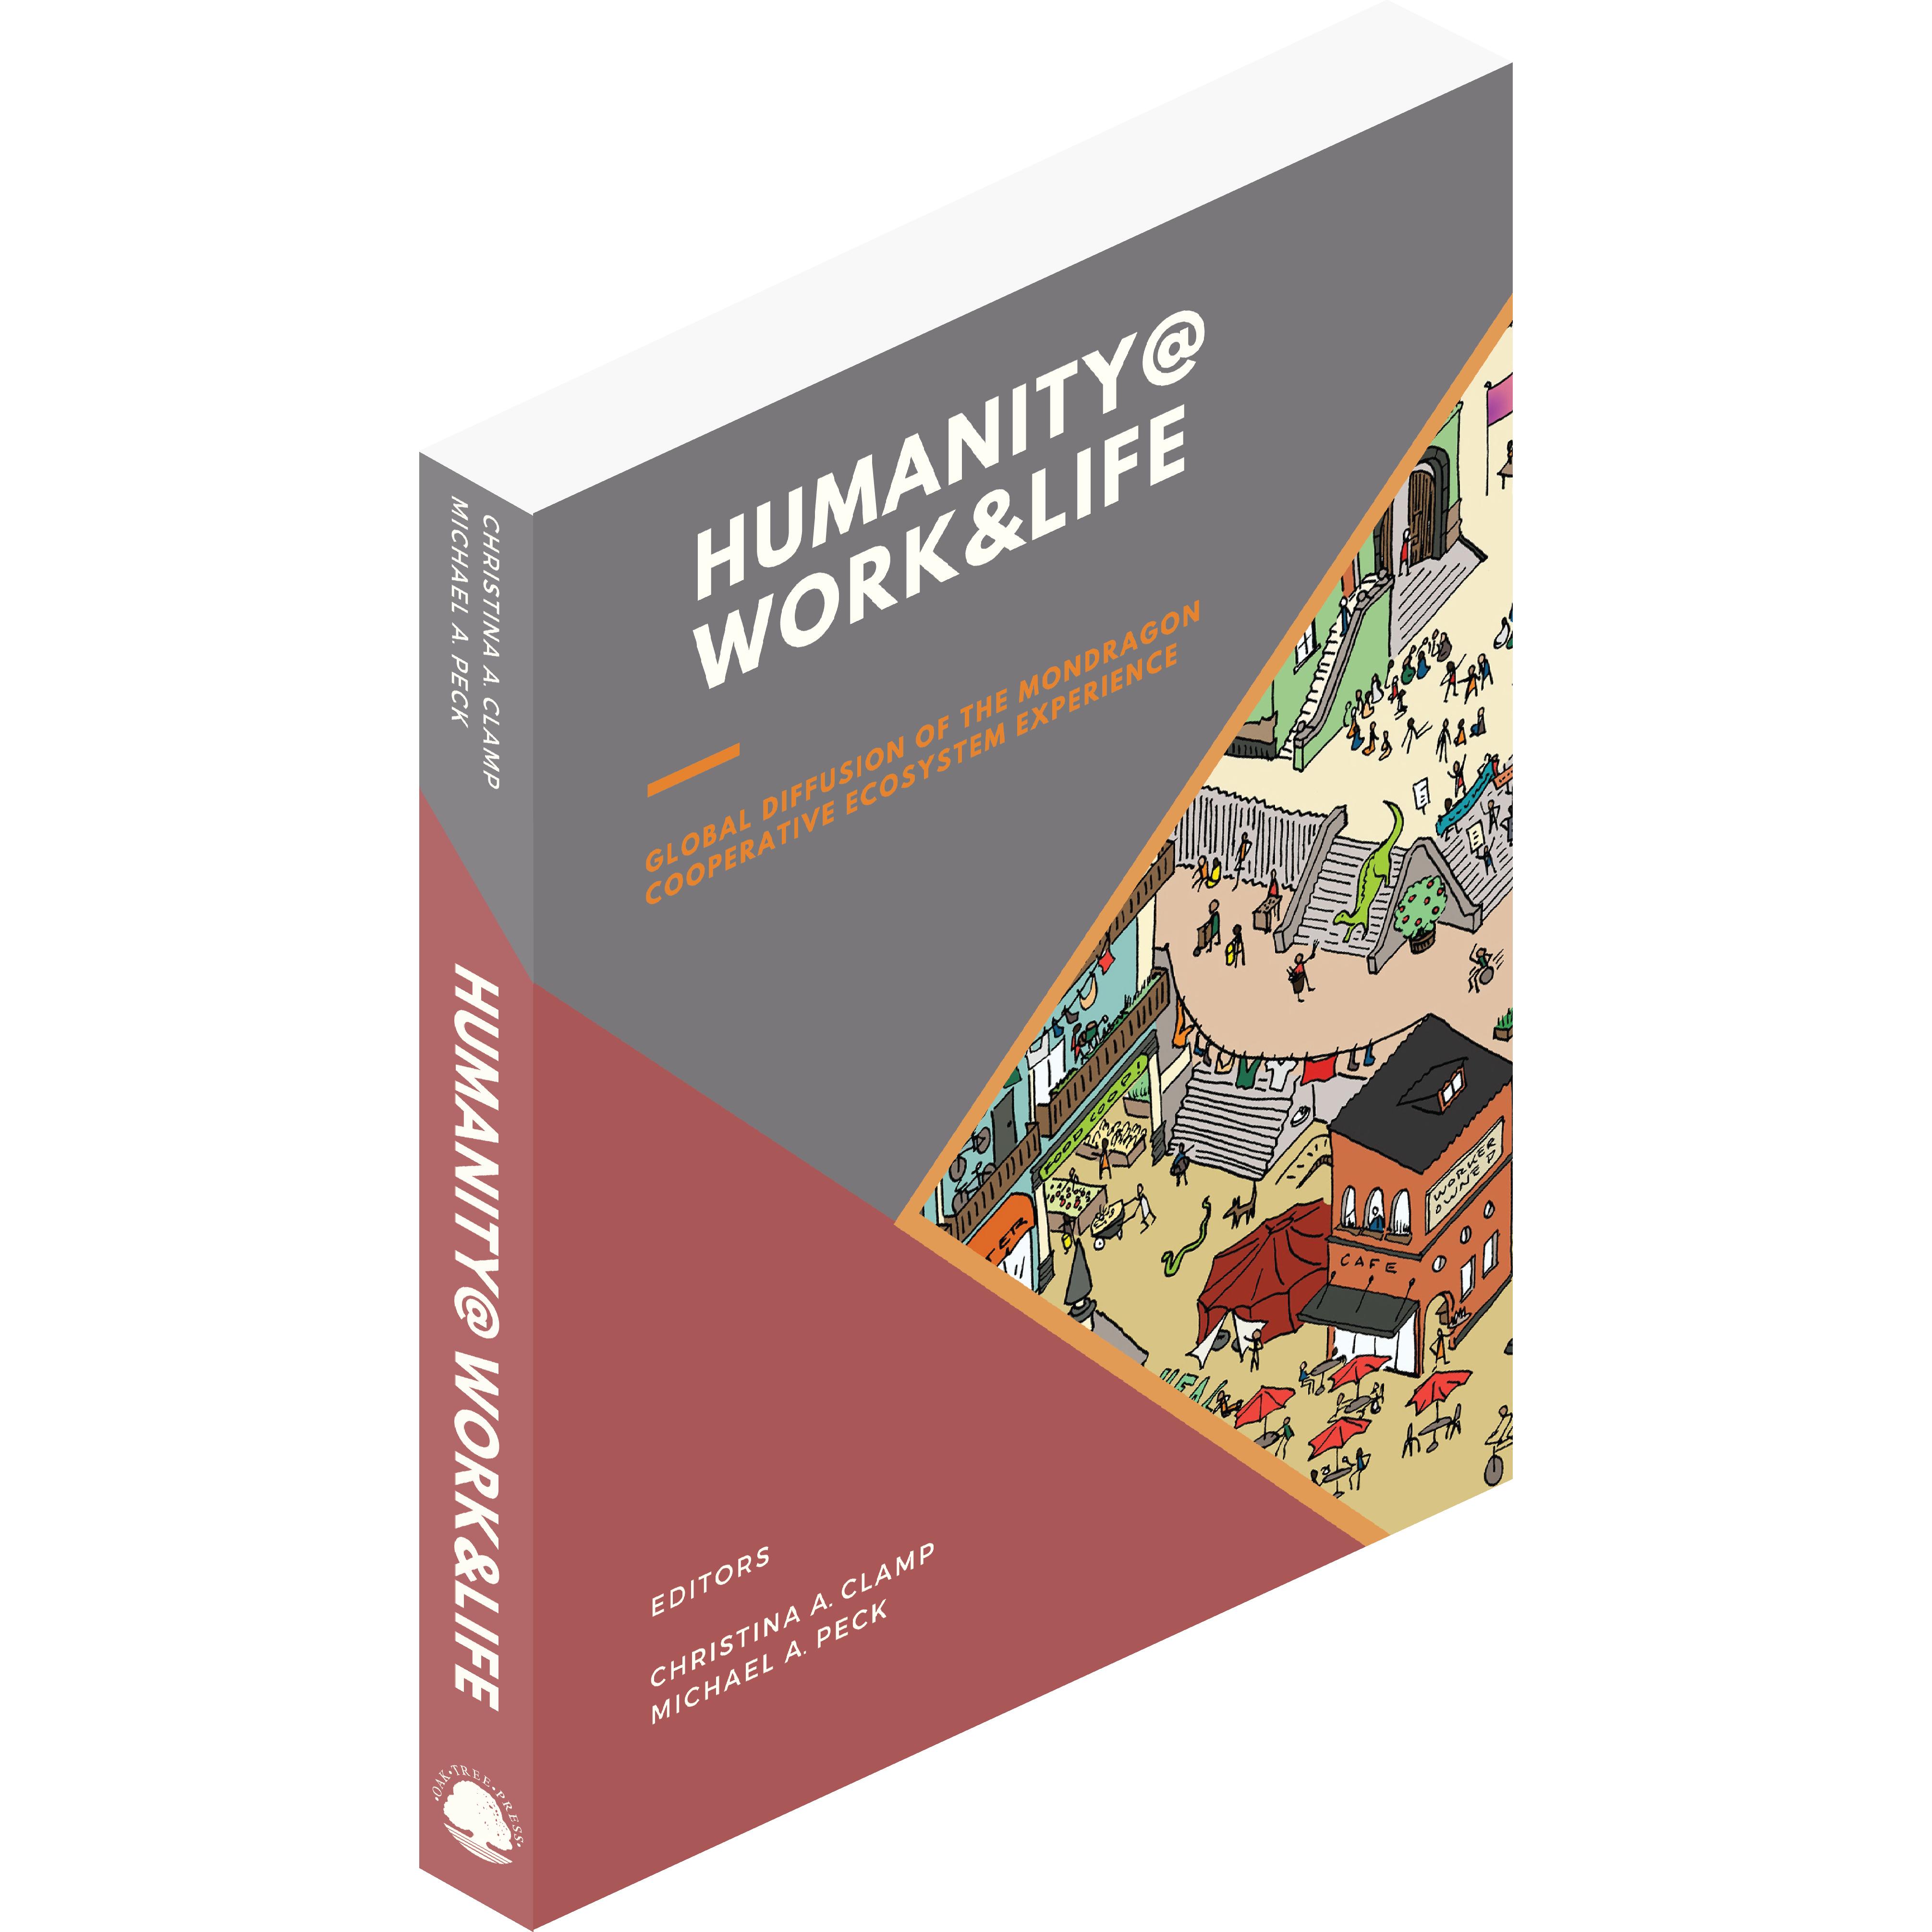 Book cover of Humanity @ Work & Life by Christina Clamp and Michael A. Peck